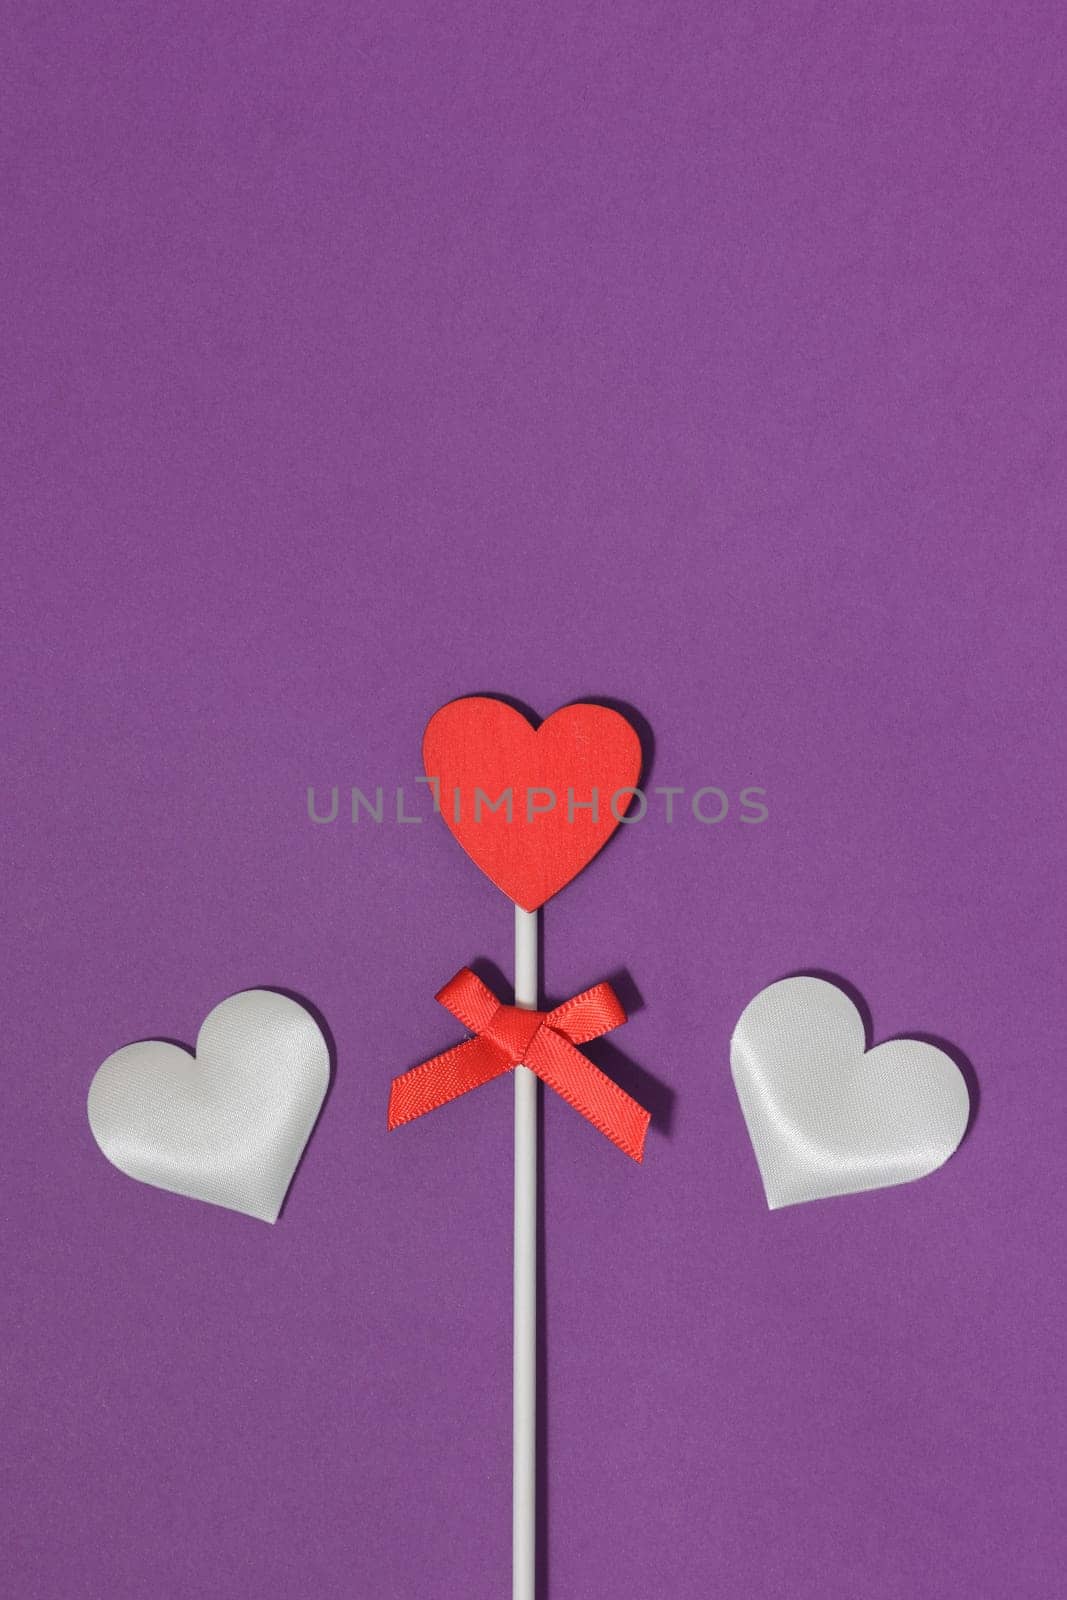 Three hearts on a purple background. Heart stacked in a stick like a lollipop, on a purple background